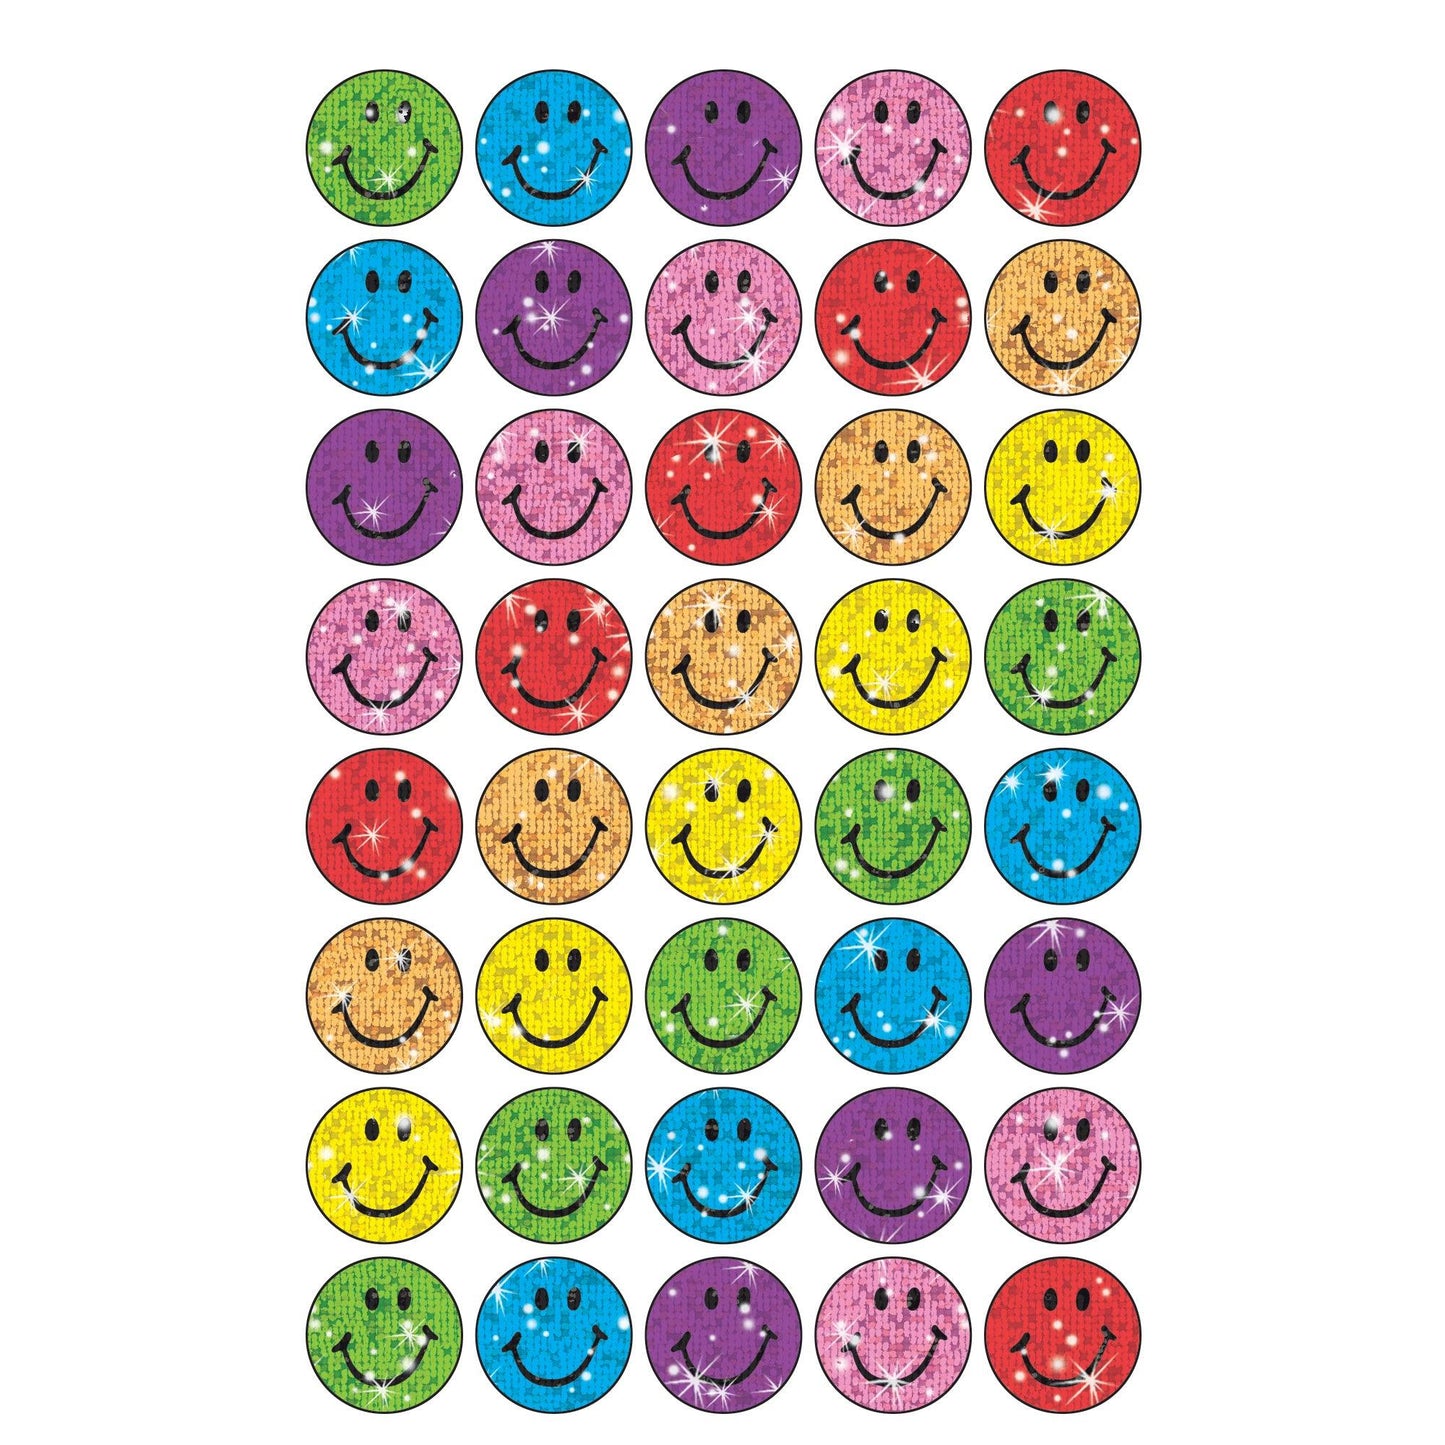 Silly Smiles superSpots® Stickers-Sparkle, 160 Per Pack, 6 Packs - Loomini